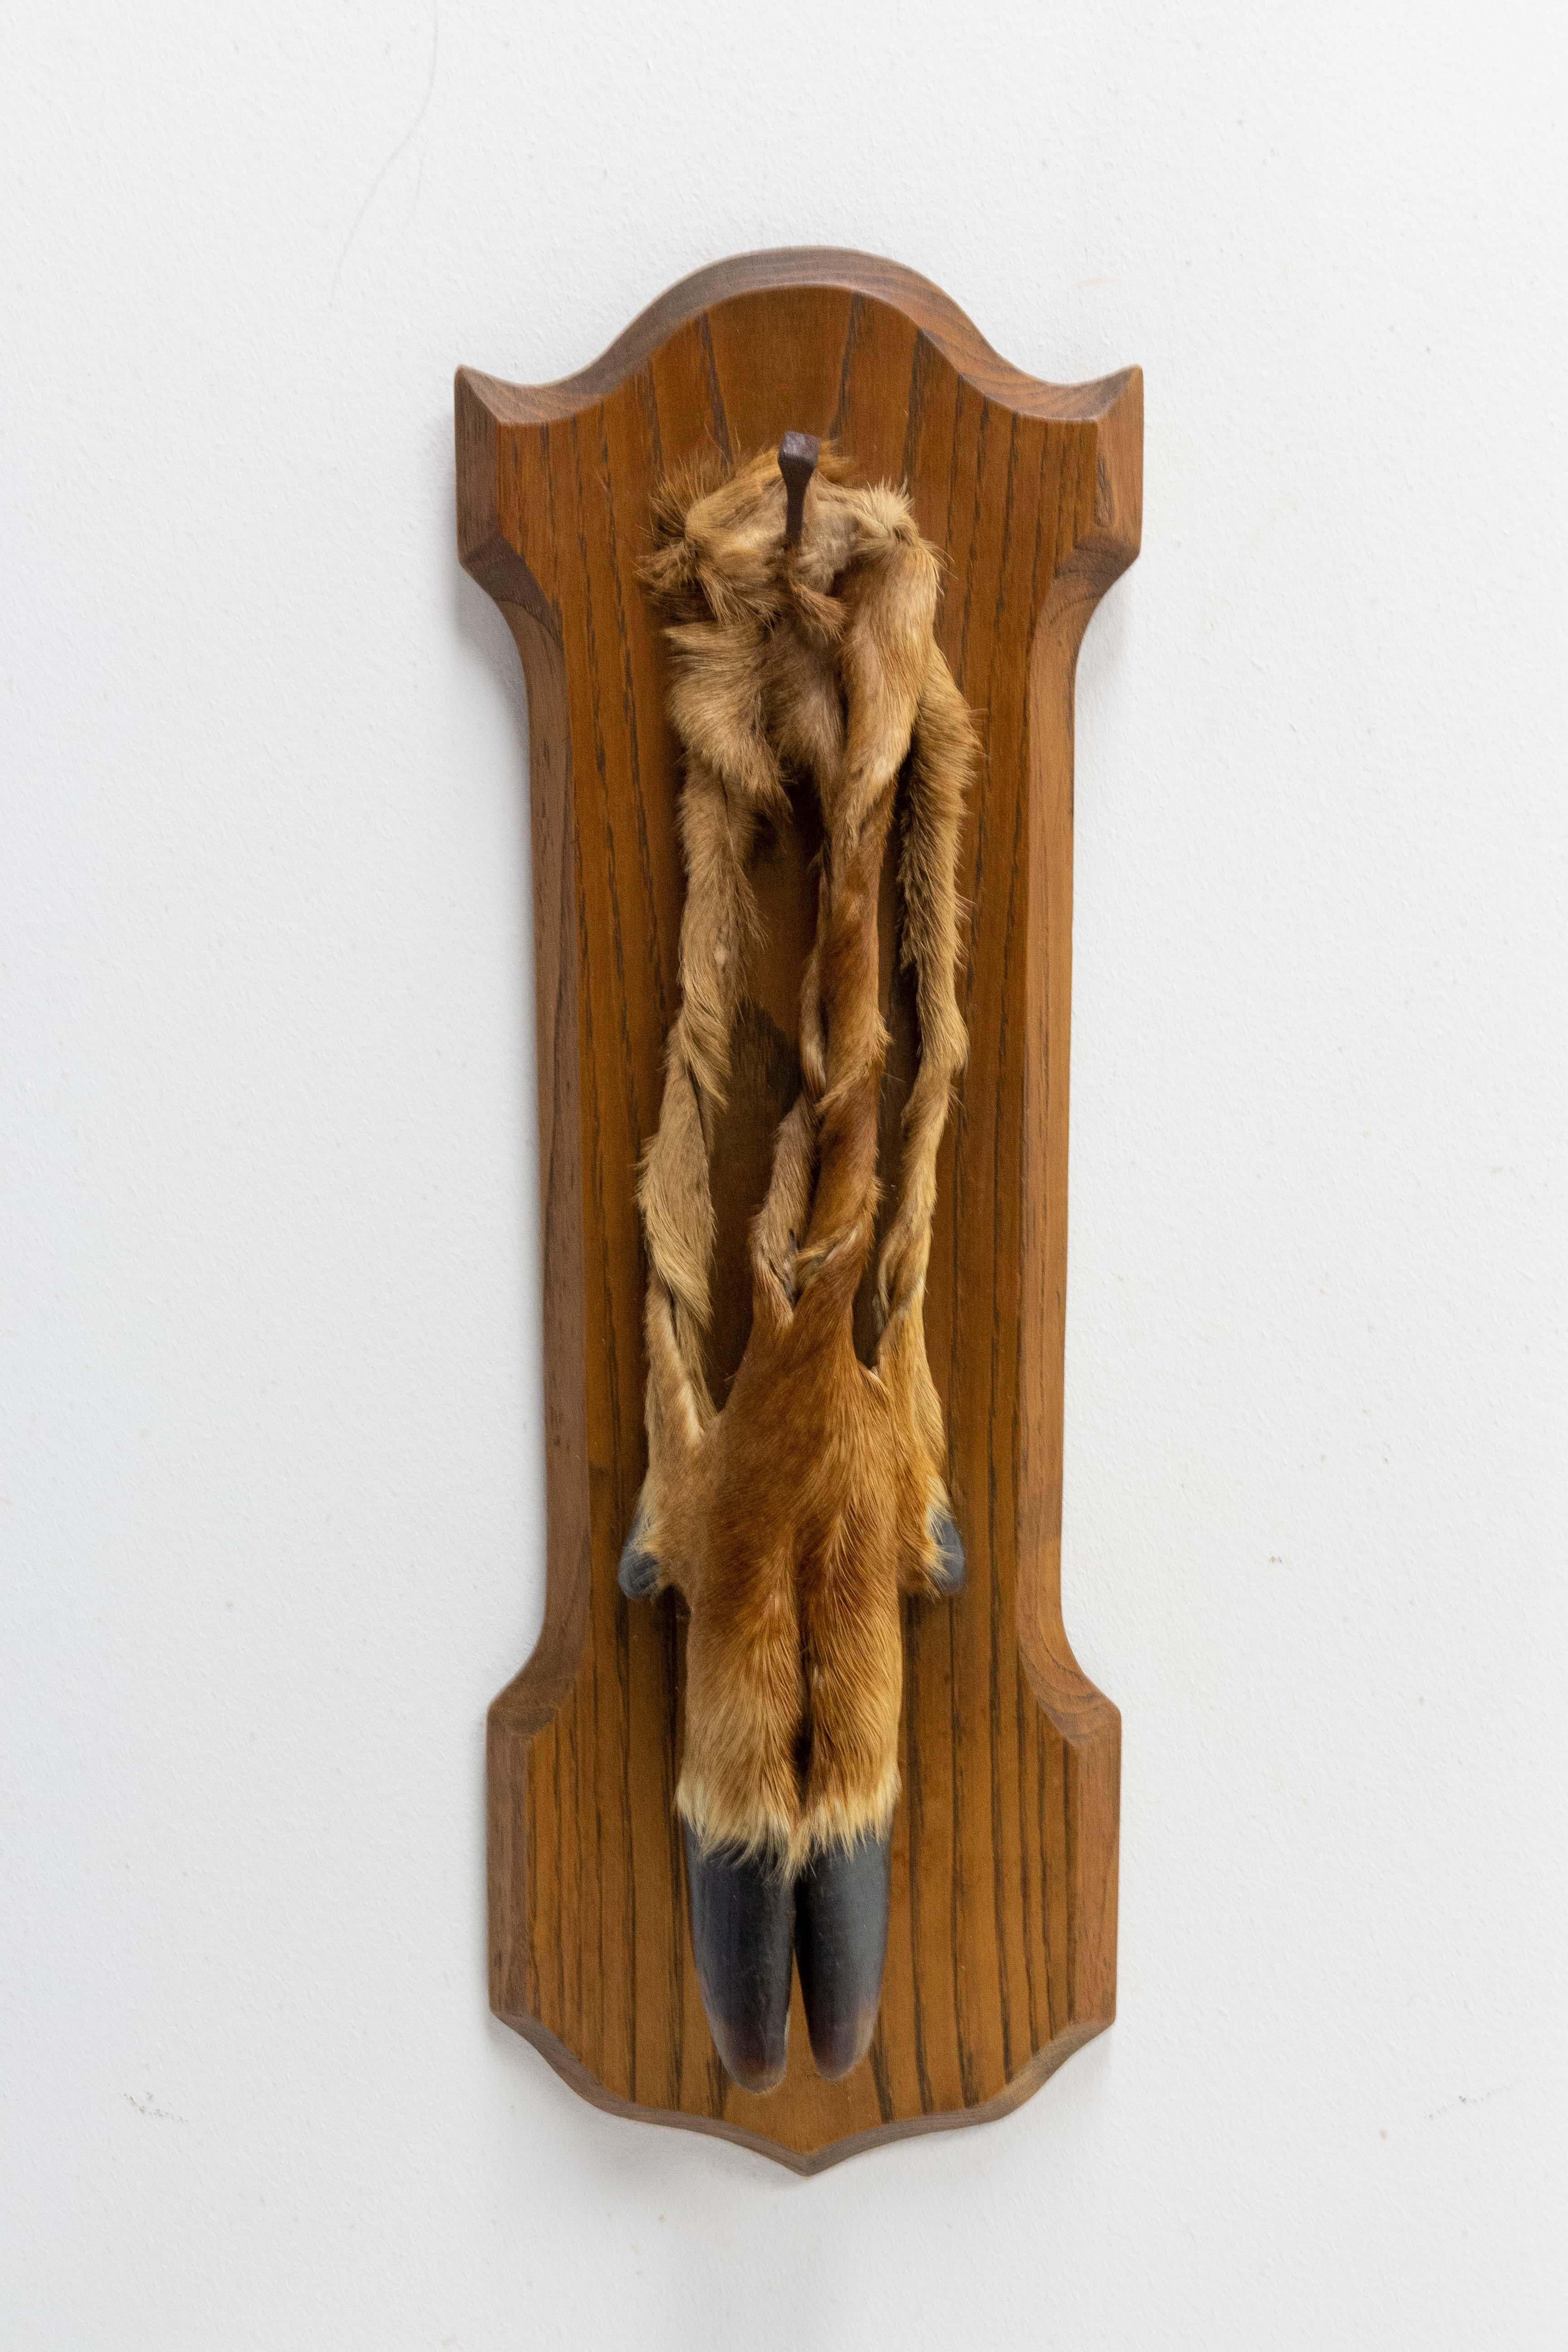 Midcentury hunting trophy made with an oak frame and a deer foot
Ideal for a chalet style decoration
French, circa 1960.
Good vintage condition

Shipping:
L16,5 P7 H48 0,8 kg